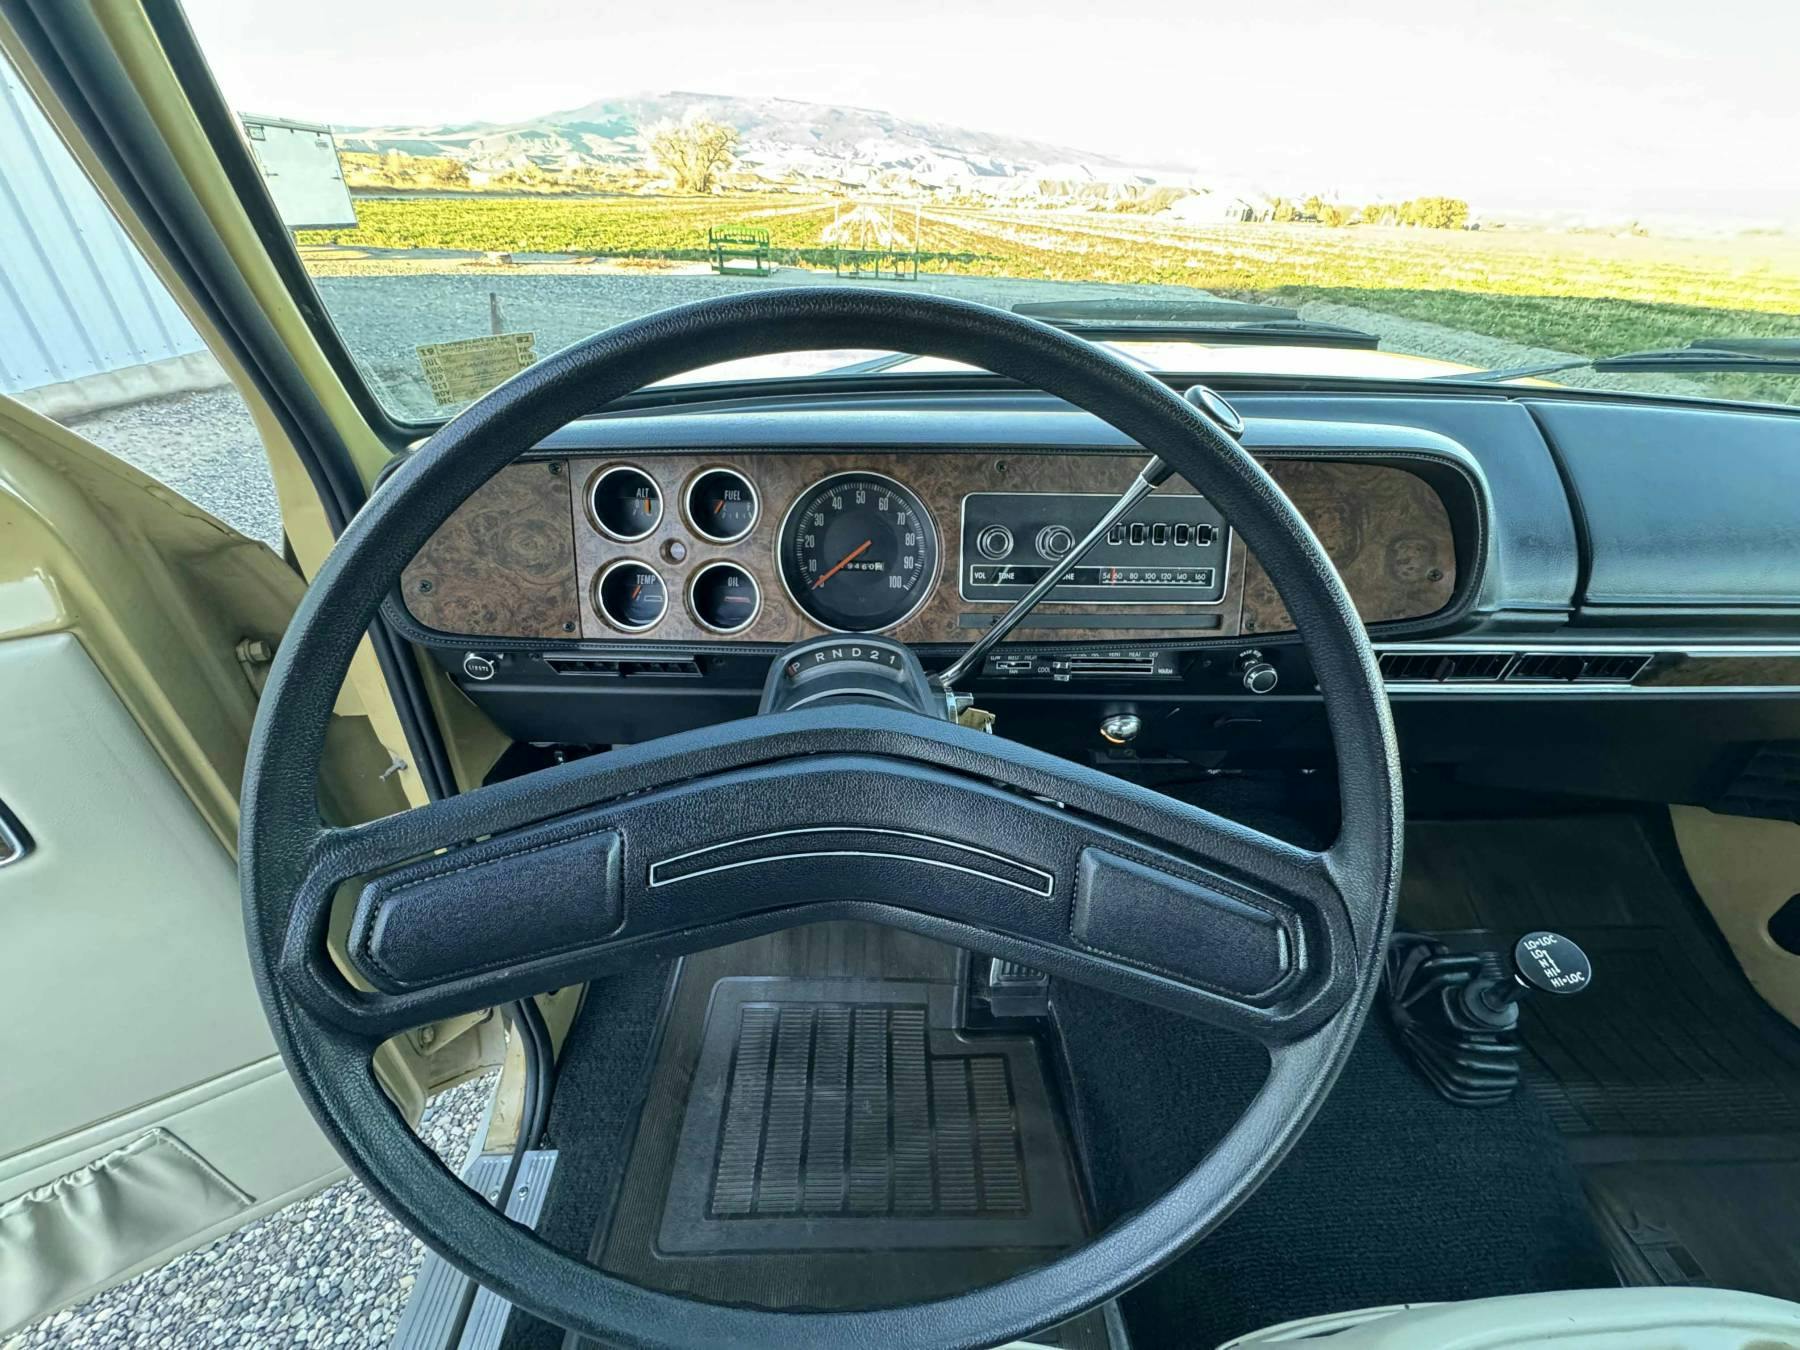 1976 Plymouth Trail Duster steering wheel